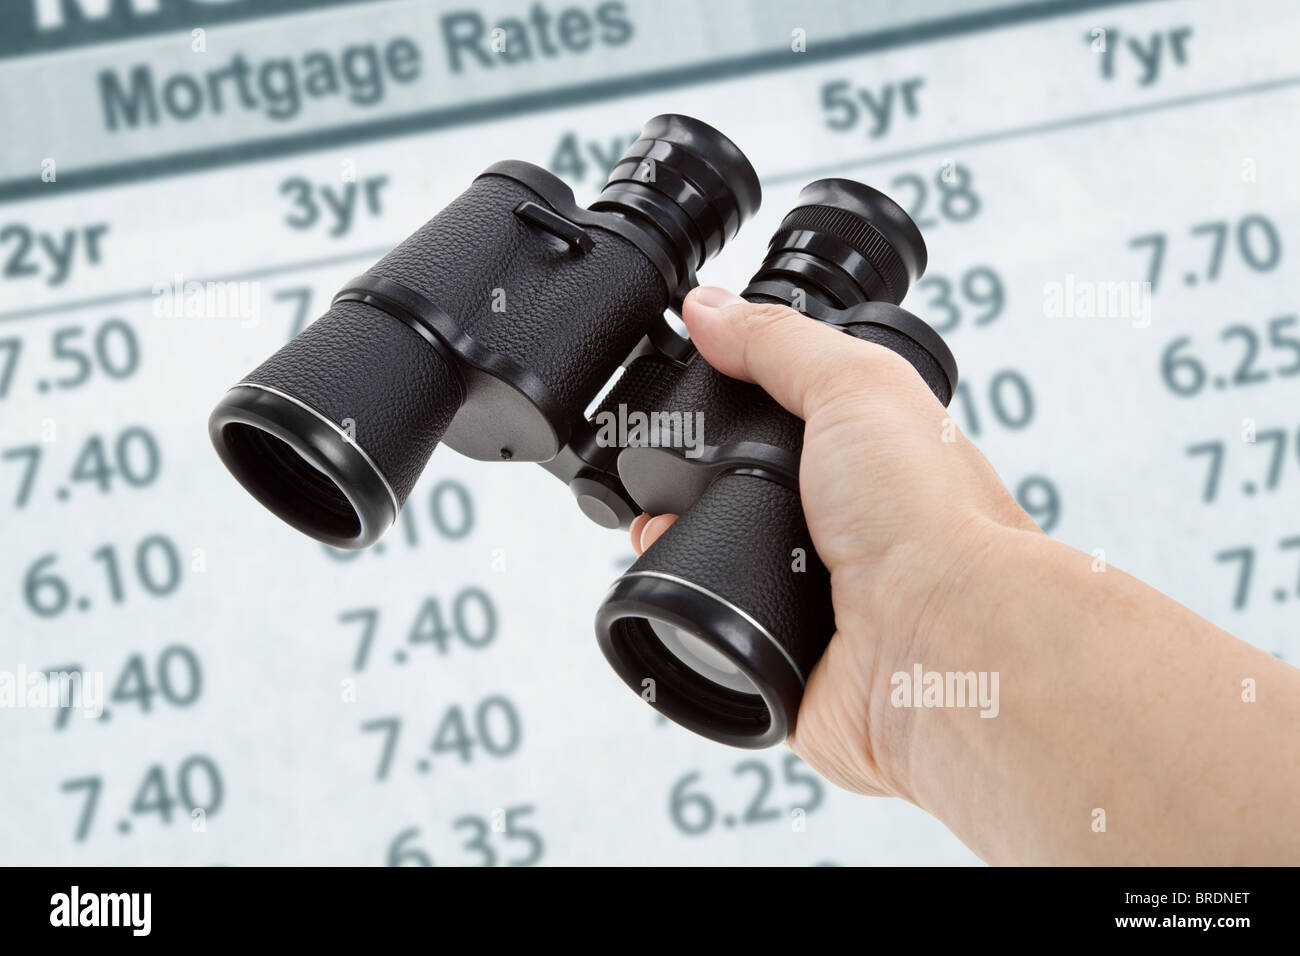 Binoculars and Mortgage Rates, concept of Business success Stock Photo